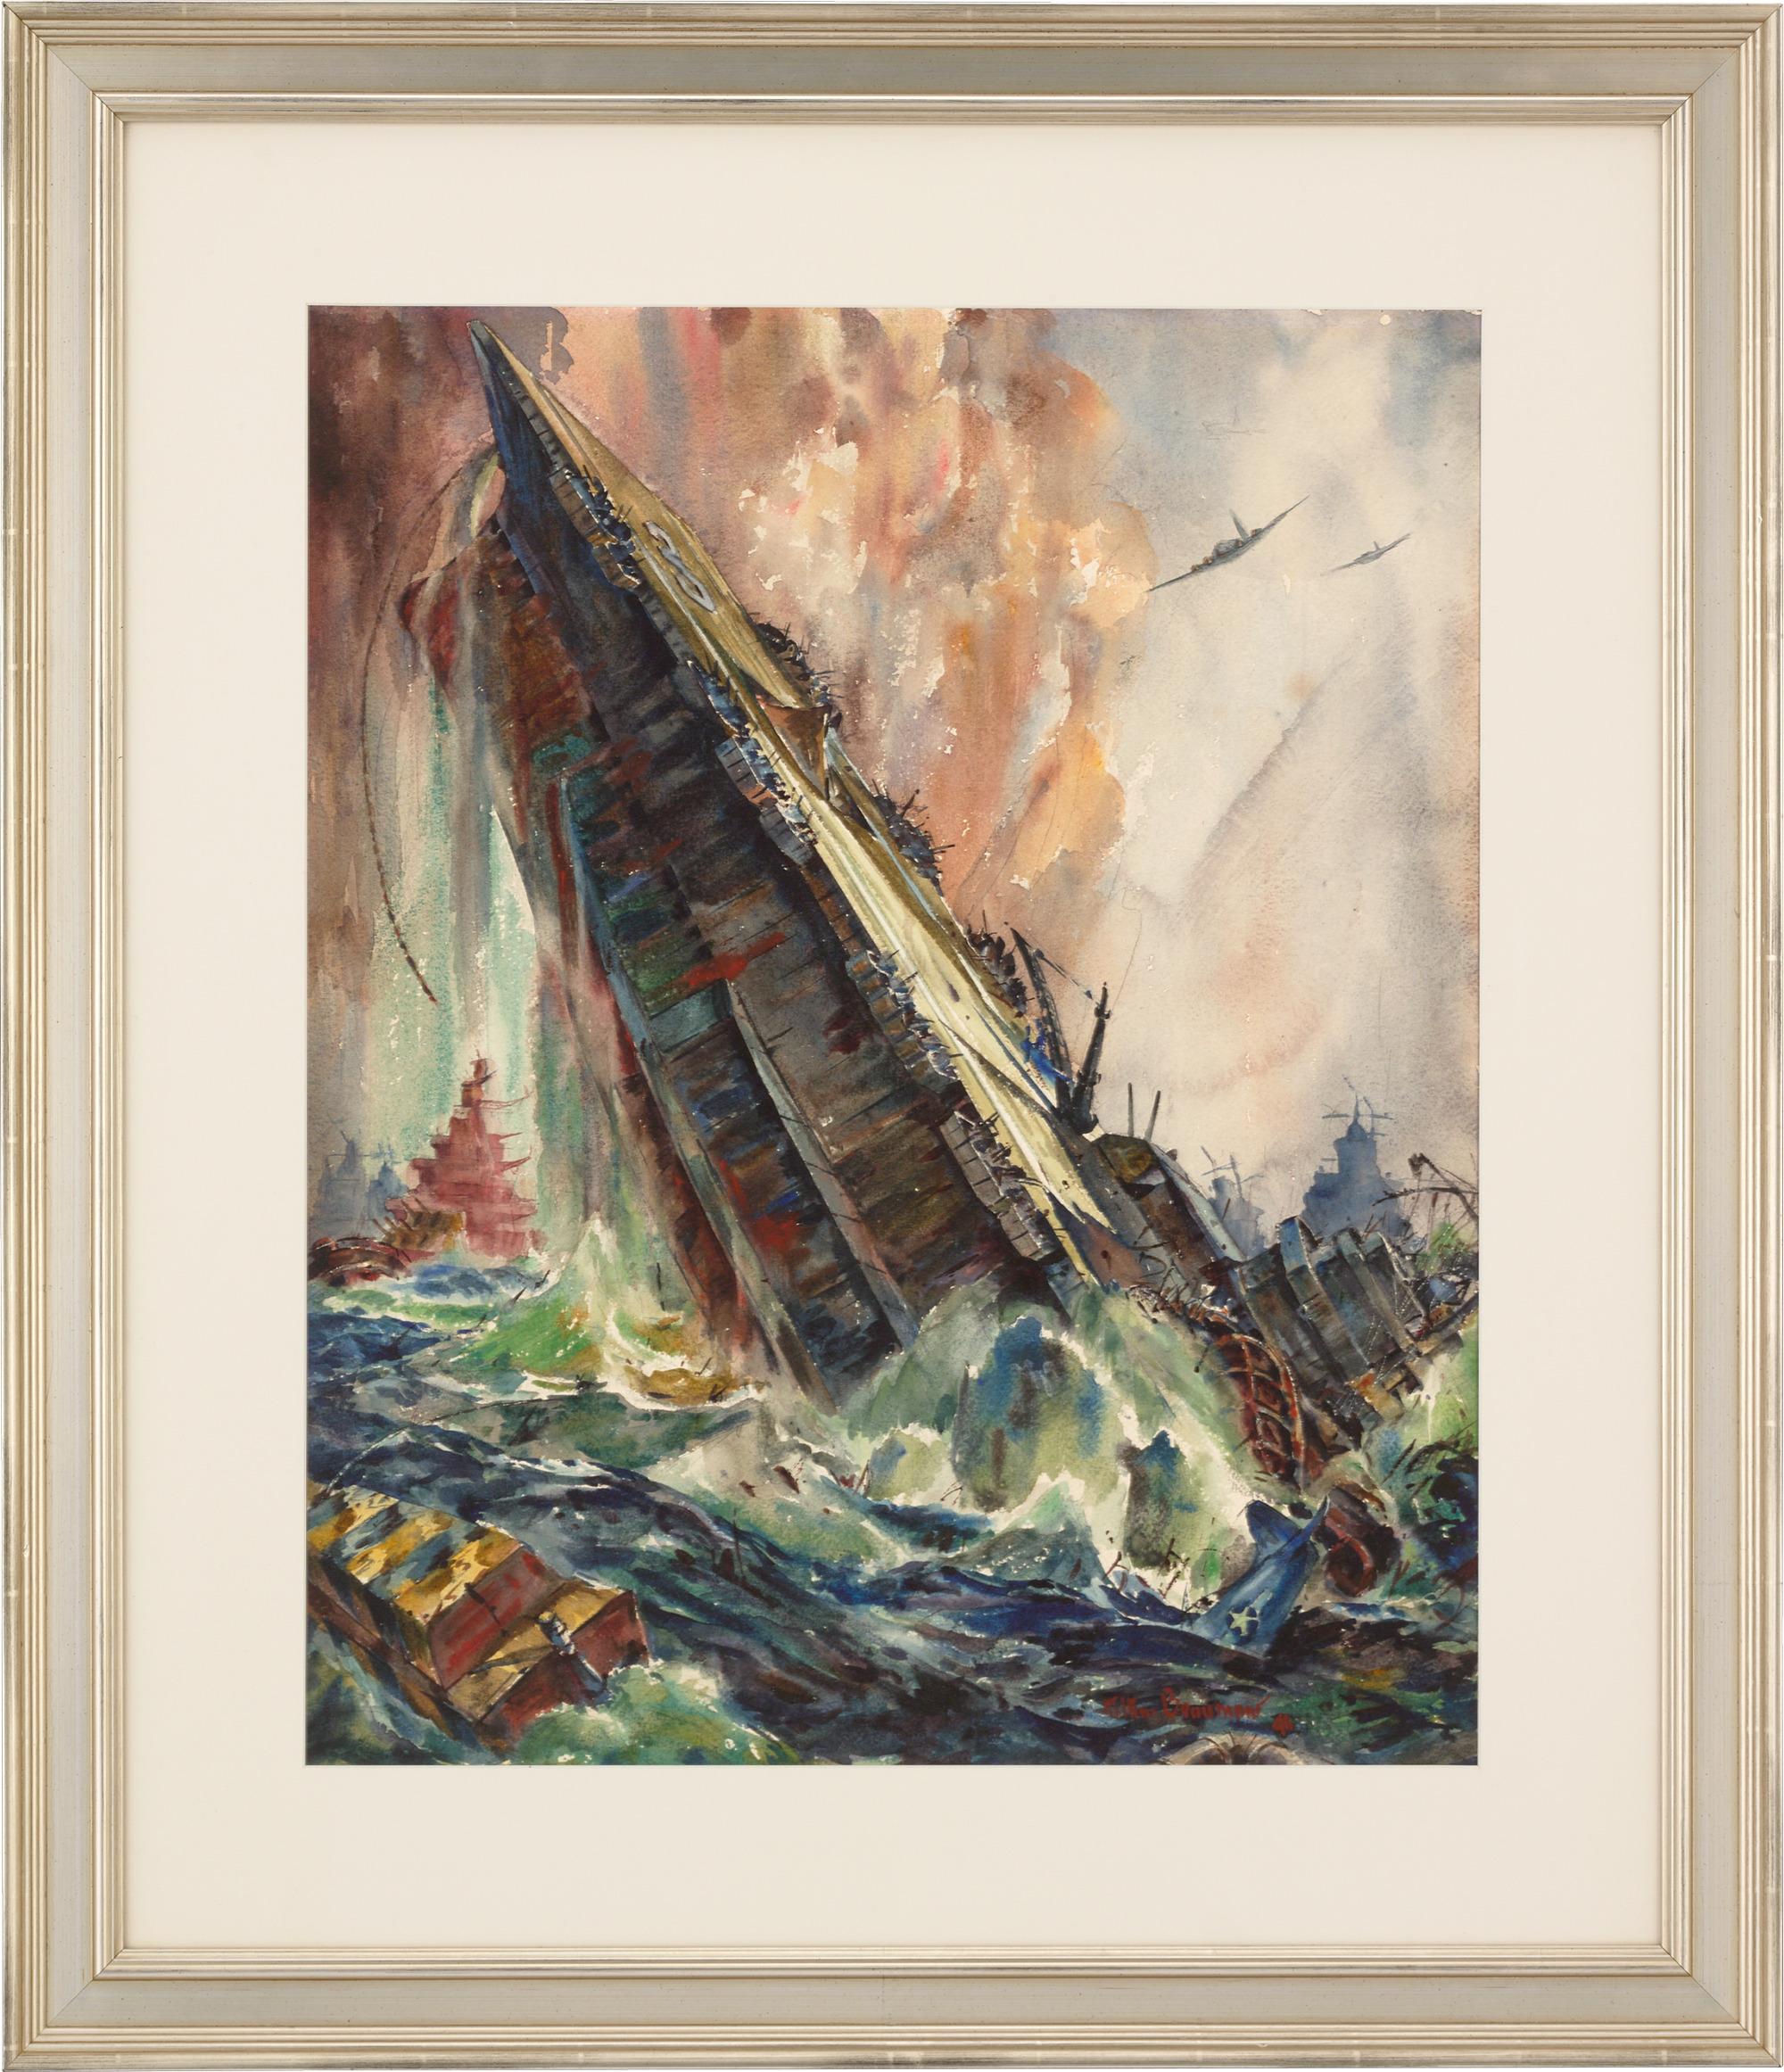 War Correspondent
American

The Sinking of the Saratoga

This compelling watercolor captures the dramatic sinking of the USS Saratoga with bold brushstrokes and vibrant colors that bring the historic moment to life. Painted by a war correspondent